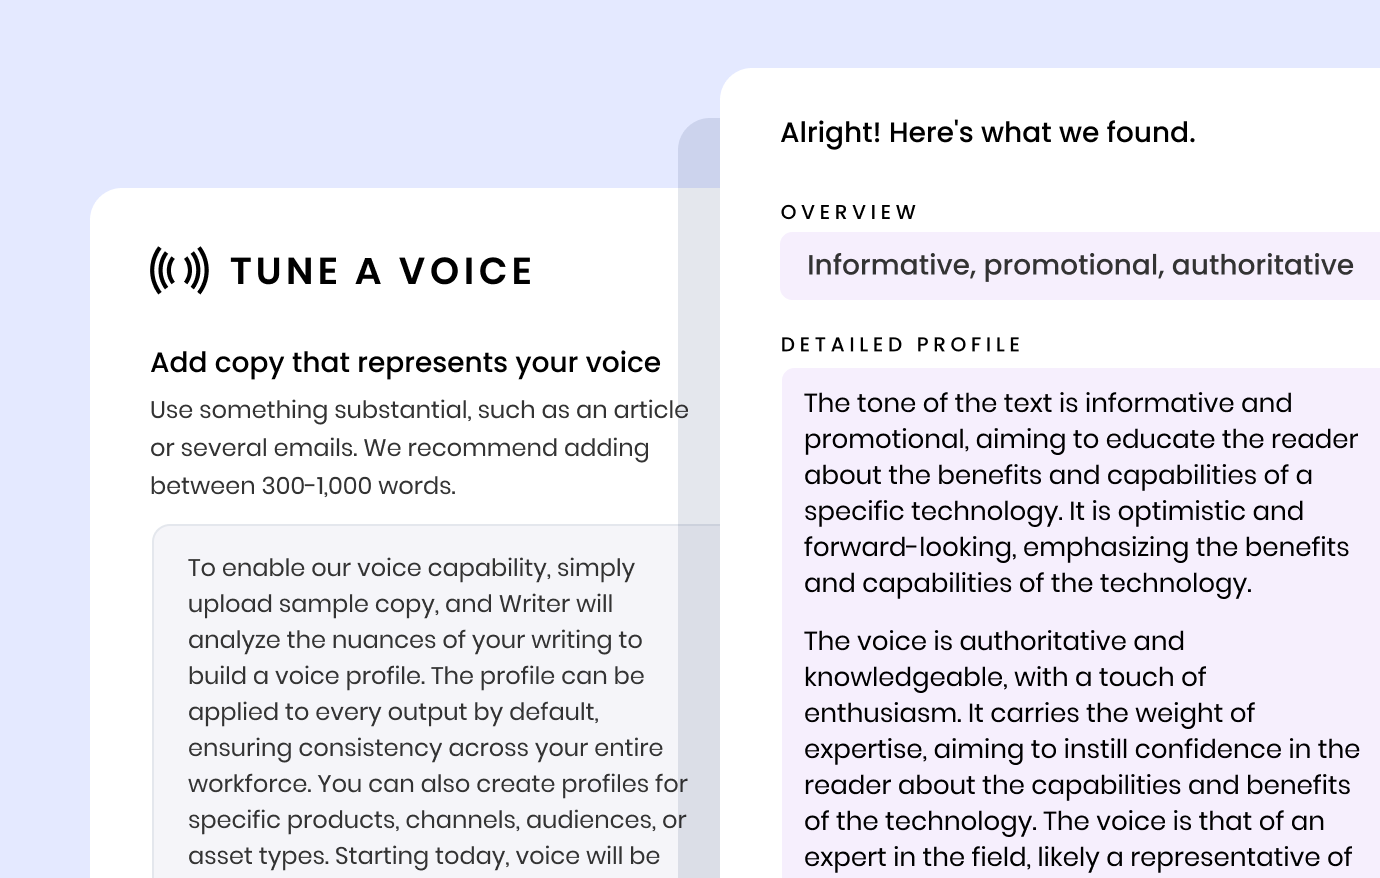 An example voice profile generated from sample text